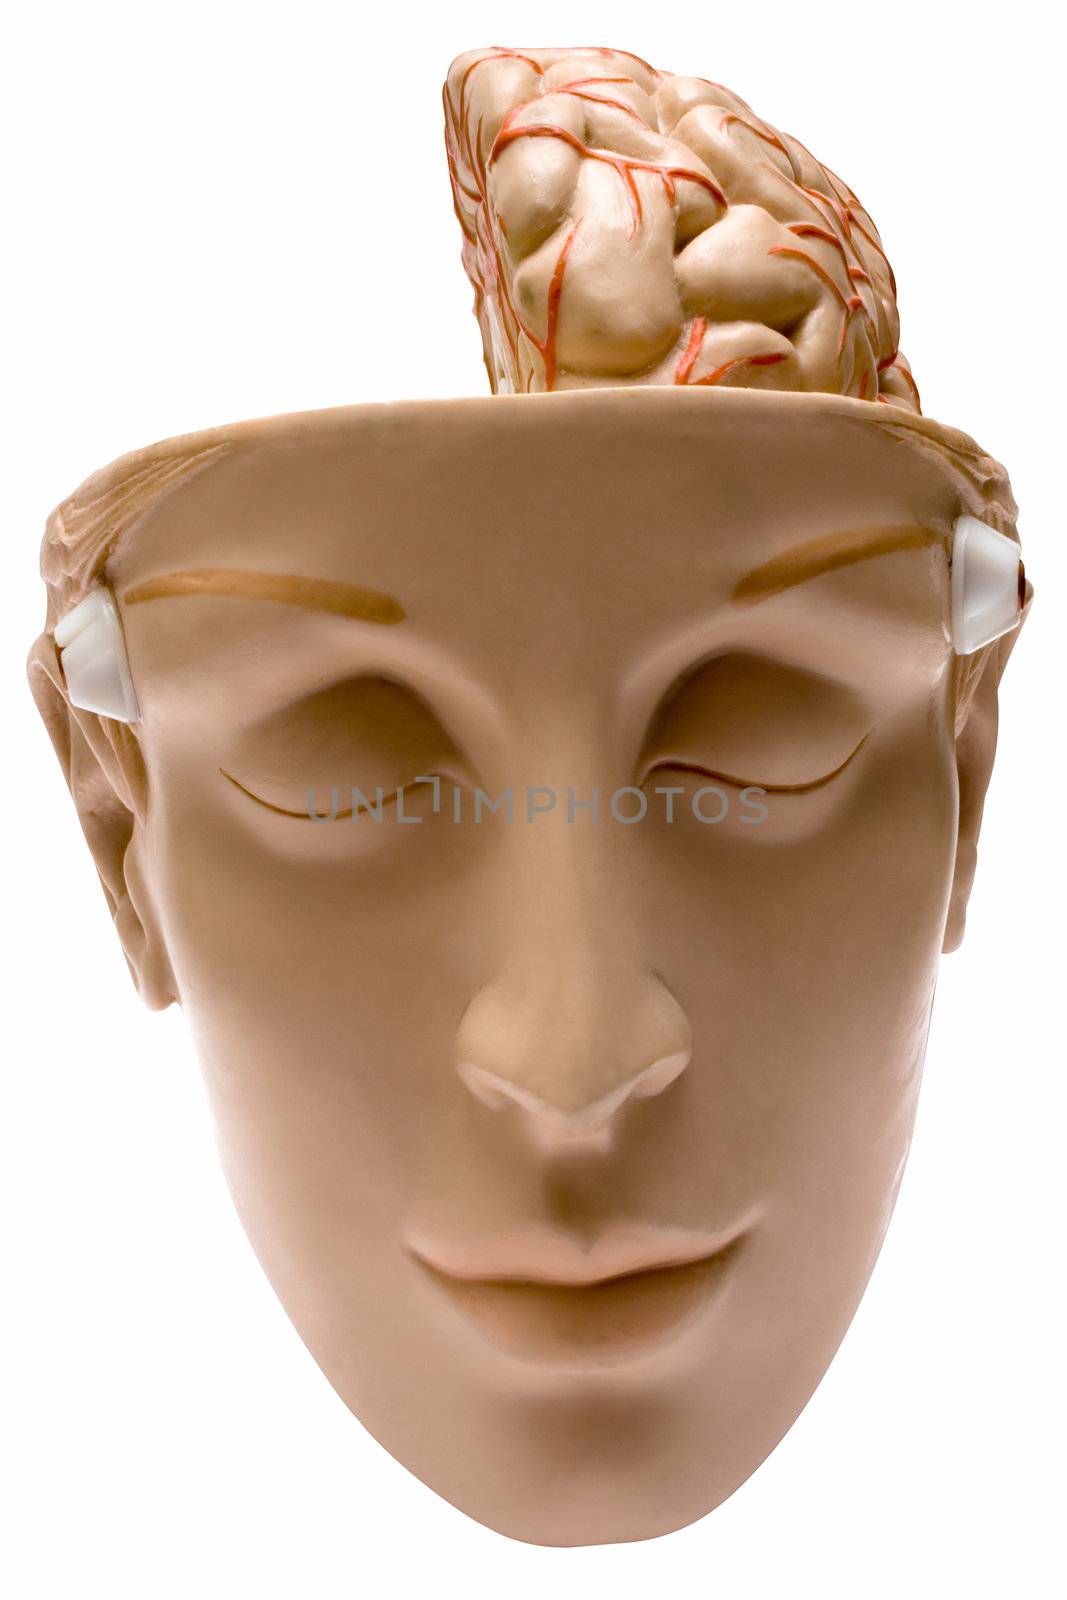 Model of the human brain isolated on a white background. File contains clipping path.